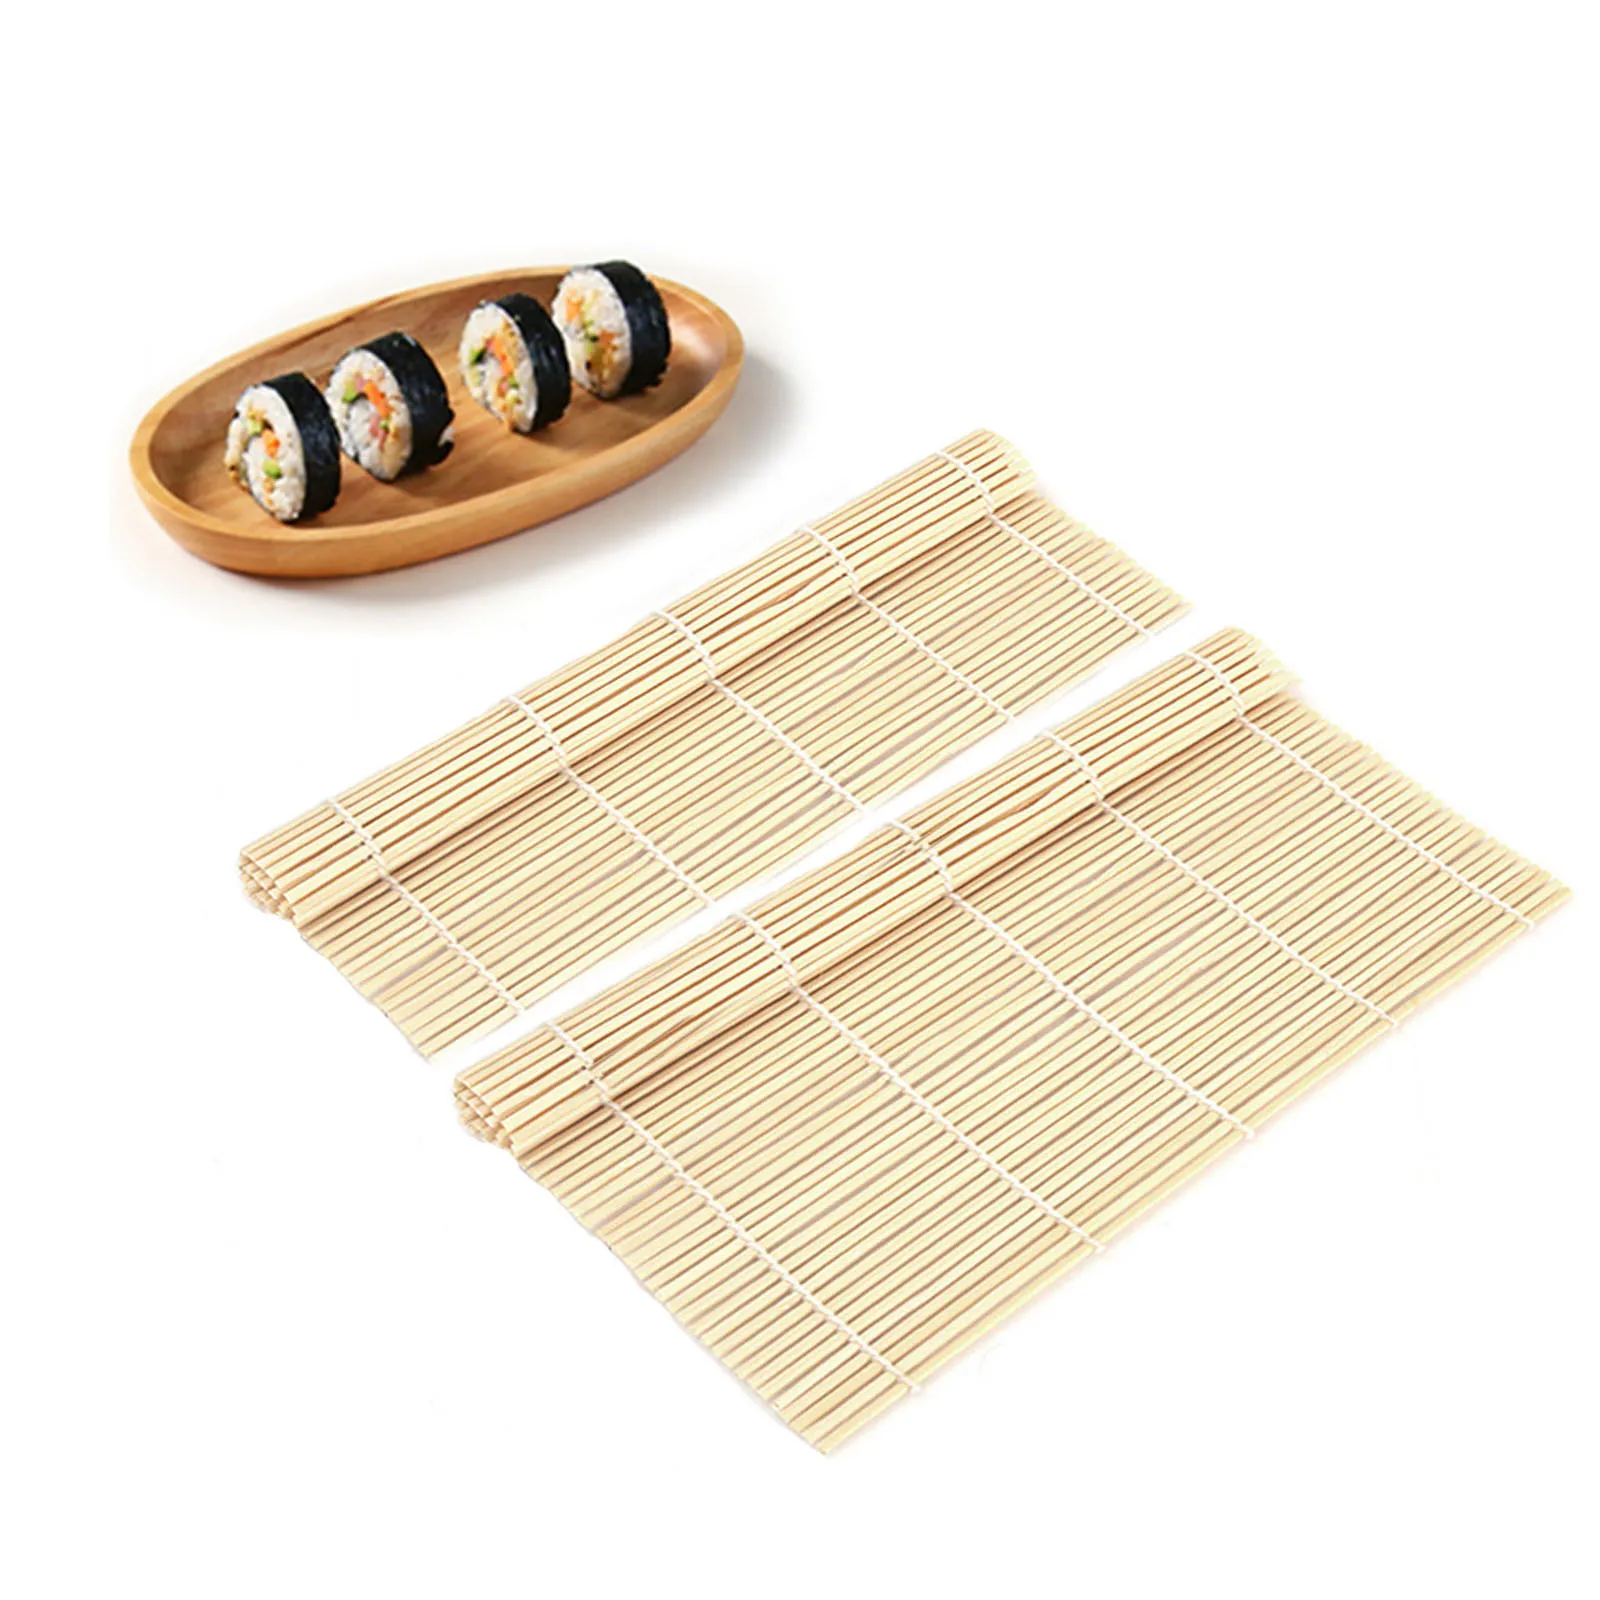 Set of 2 Japanese Style Sushi Roll Maker Bamboo Rolling Roller Mat Preparation Equipment 24 x 24cm